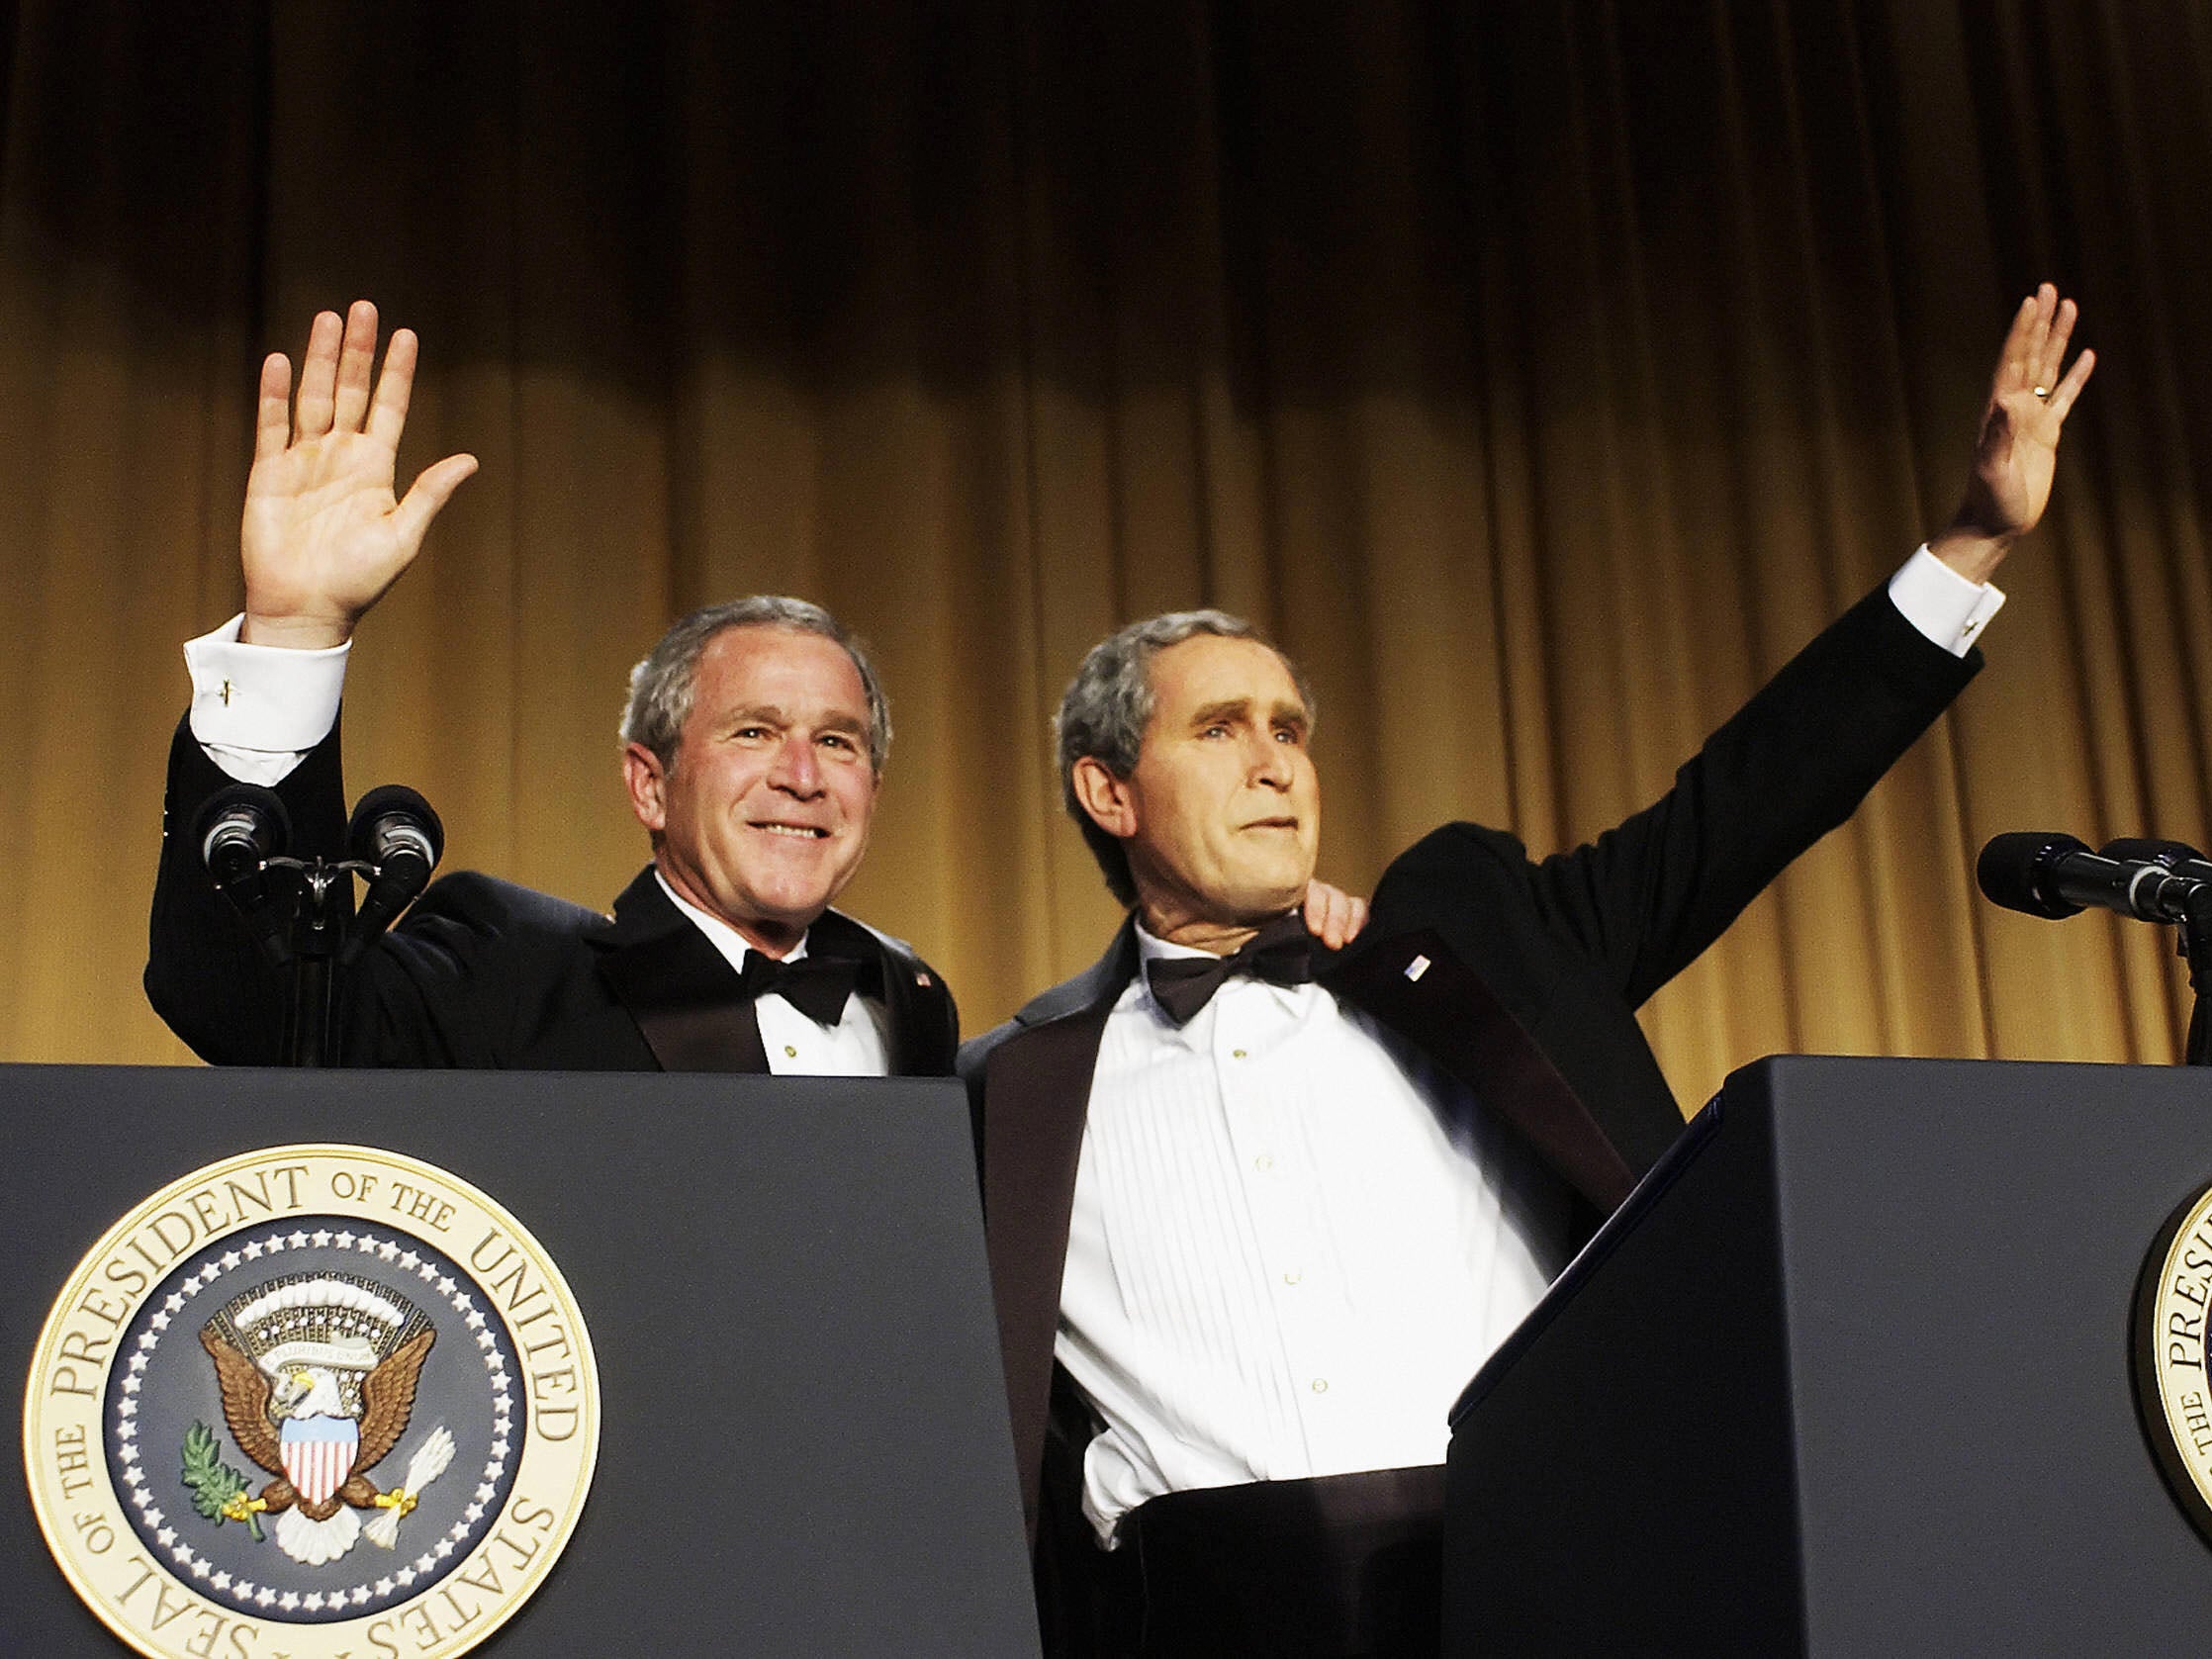 US President George W Bush (left) with impersonator Steve Bridges (right) at the White House Correspondents’ Association Dinner in 2006